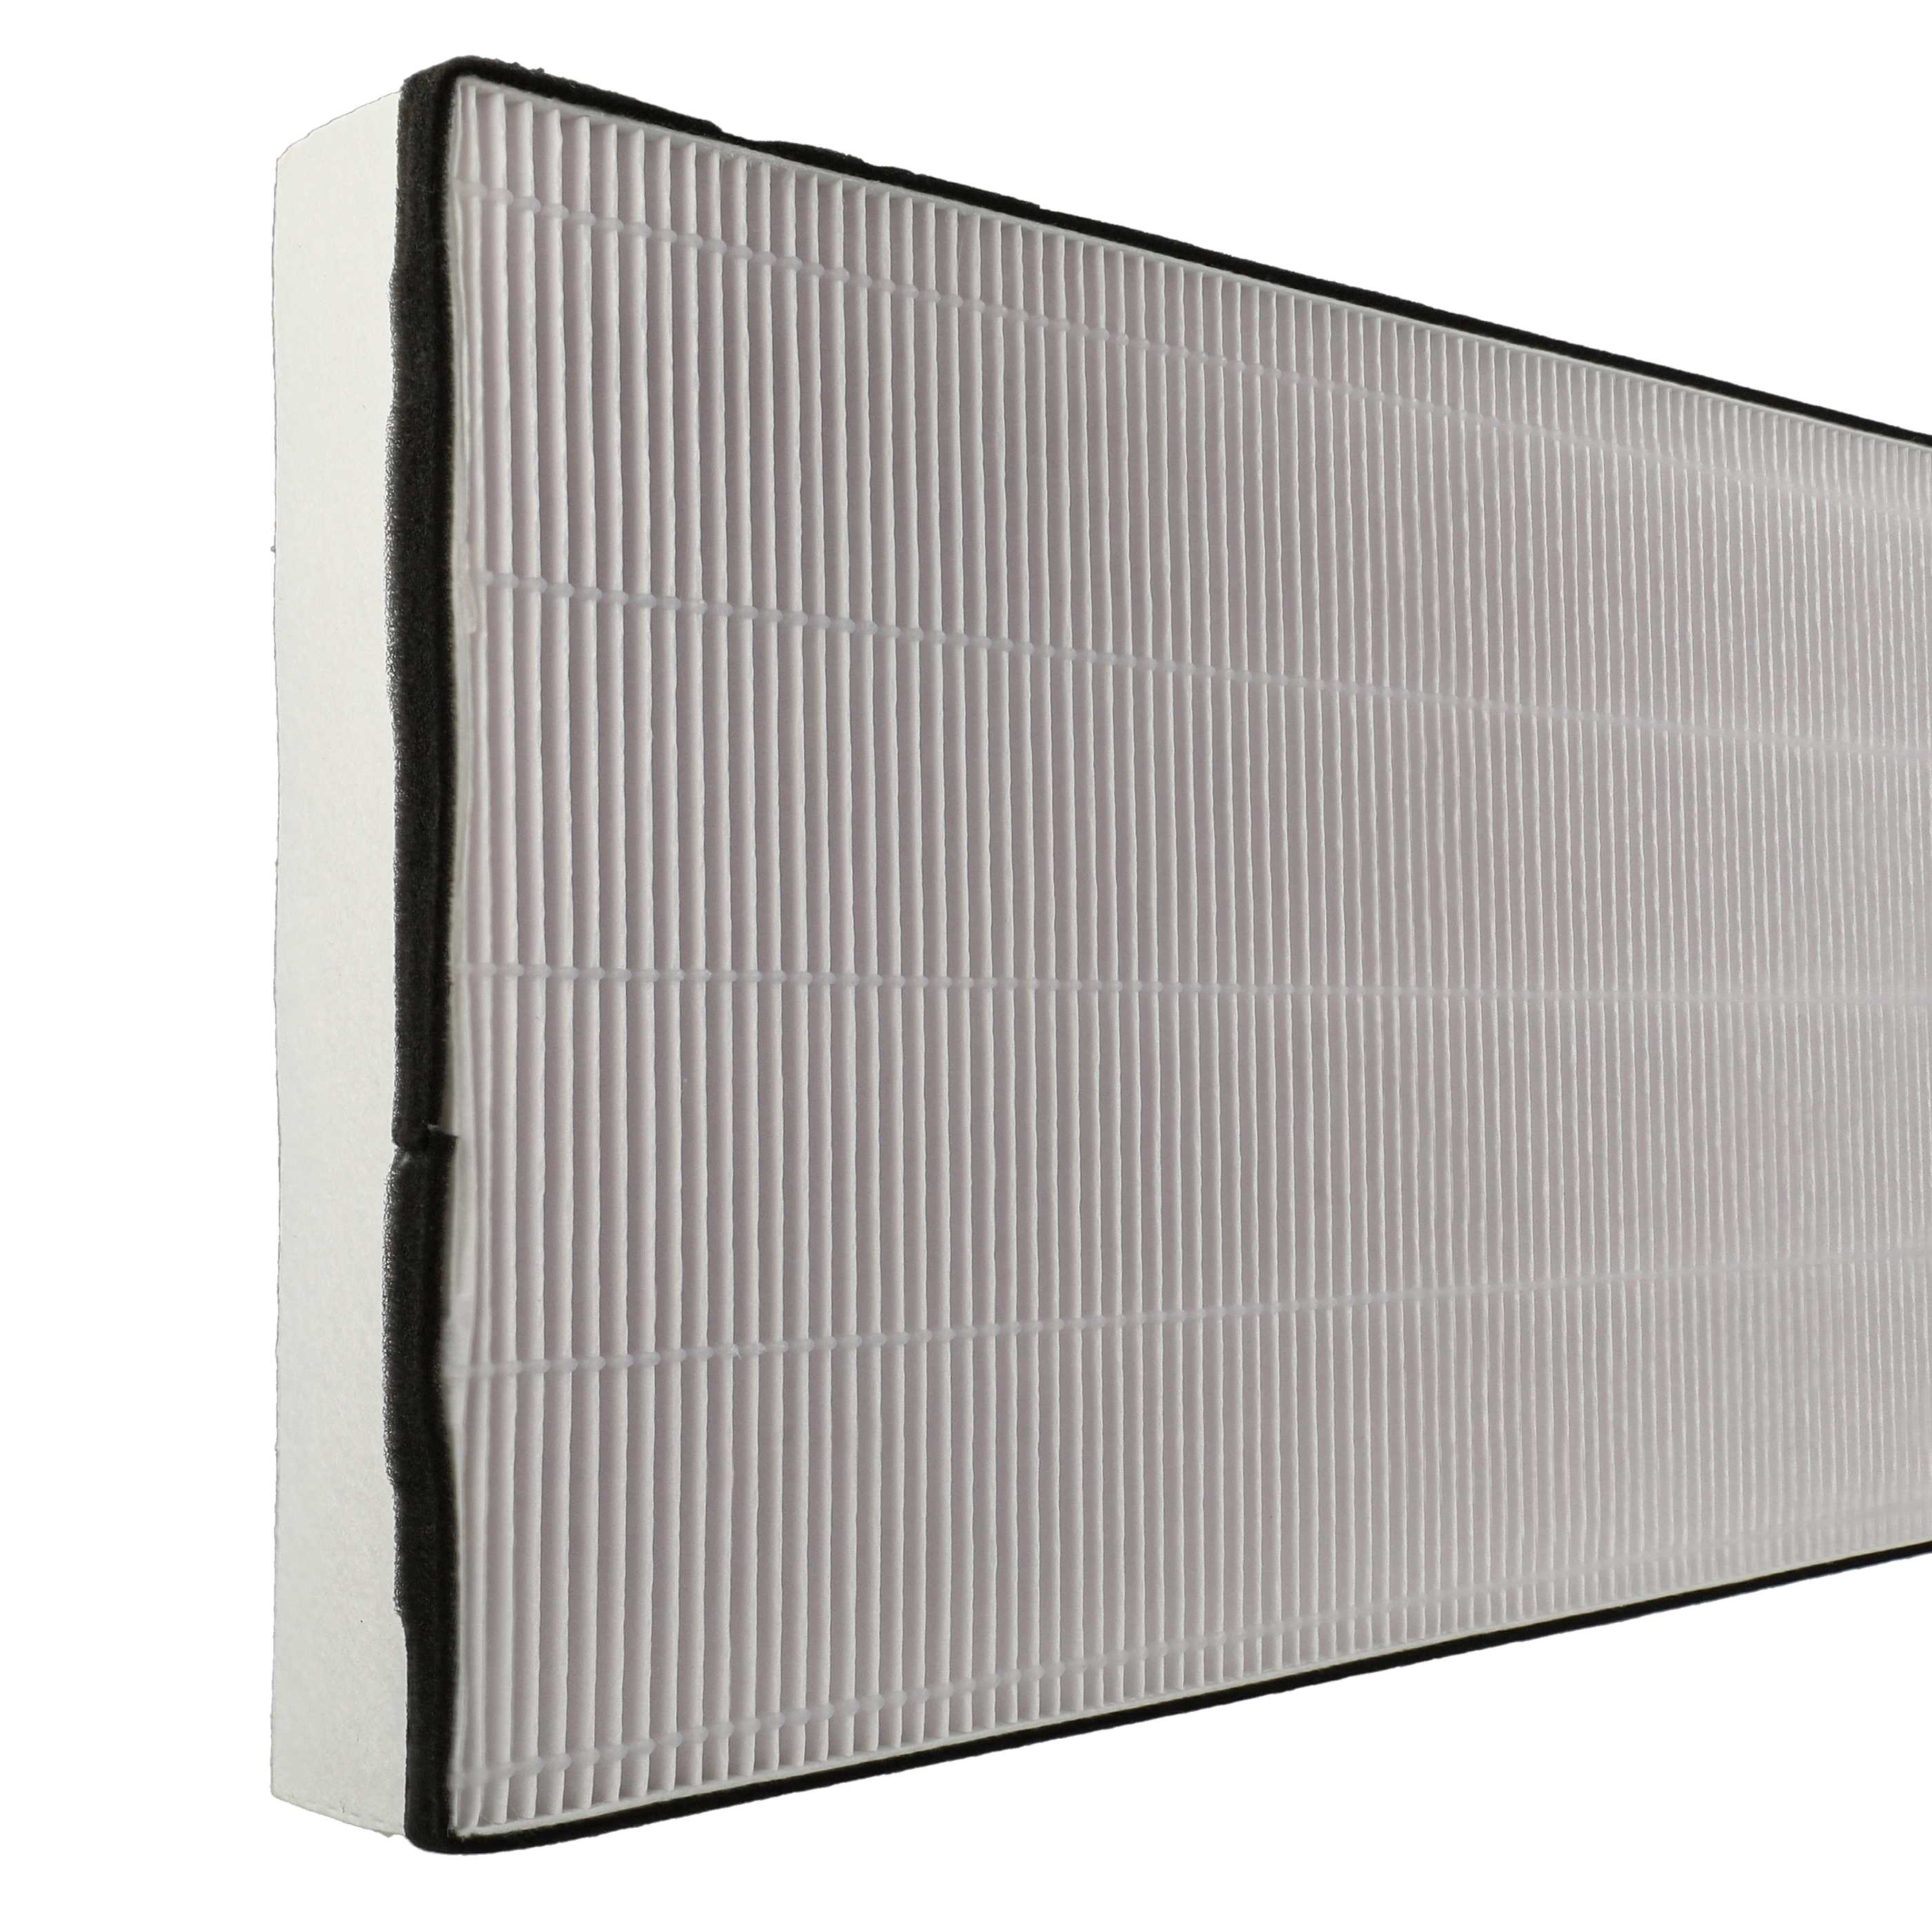  Pollen Filter replaces Helios 00042 for Helios Ventilation Devices - Air Filter